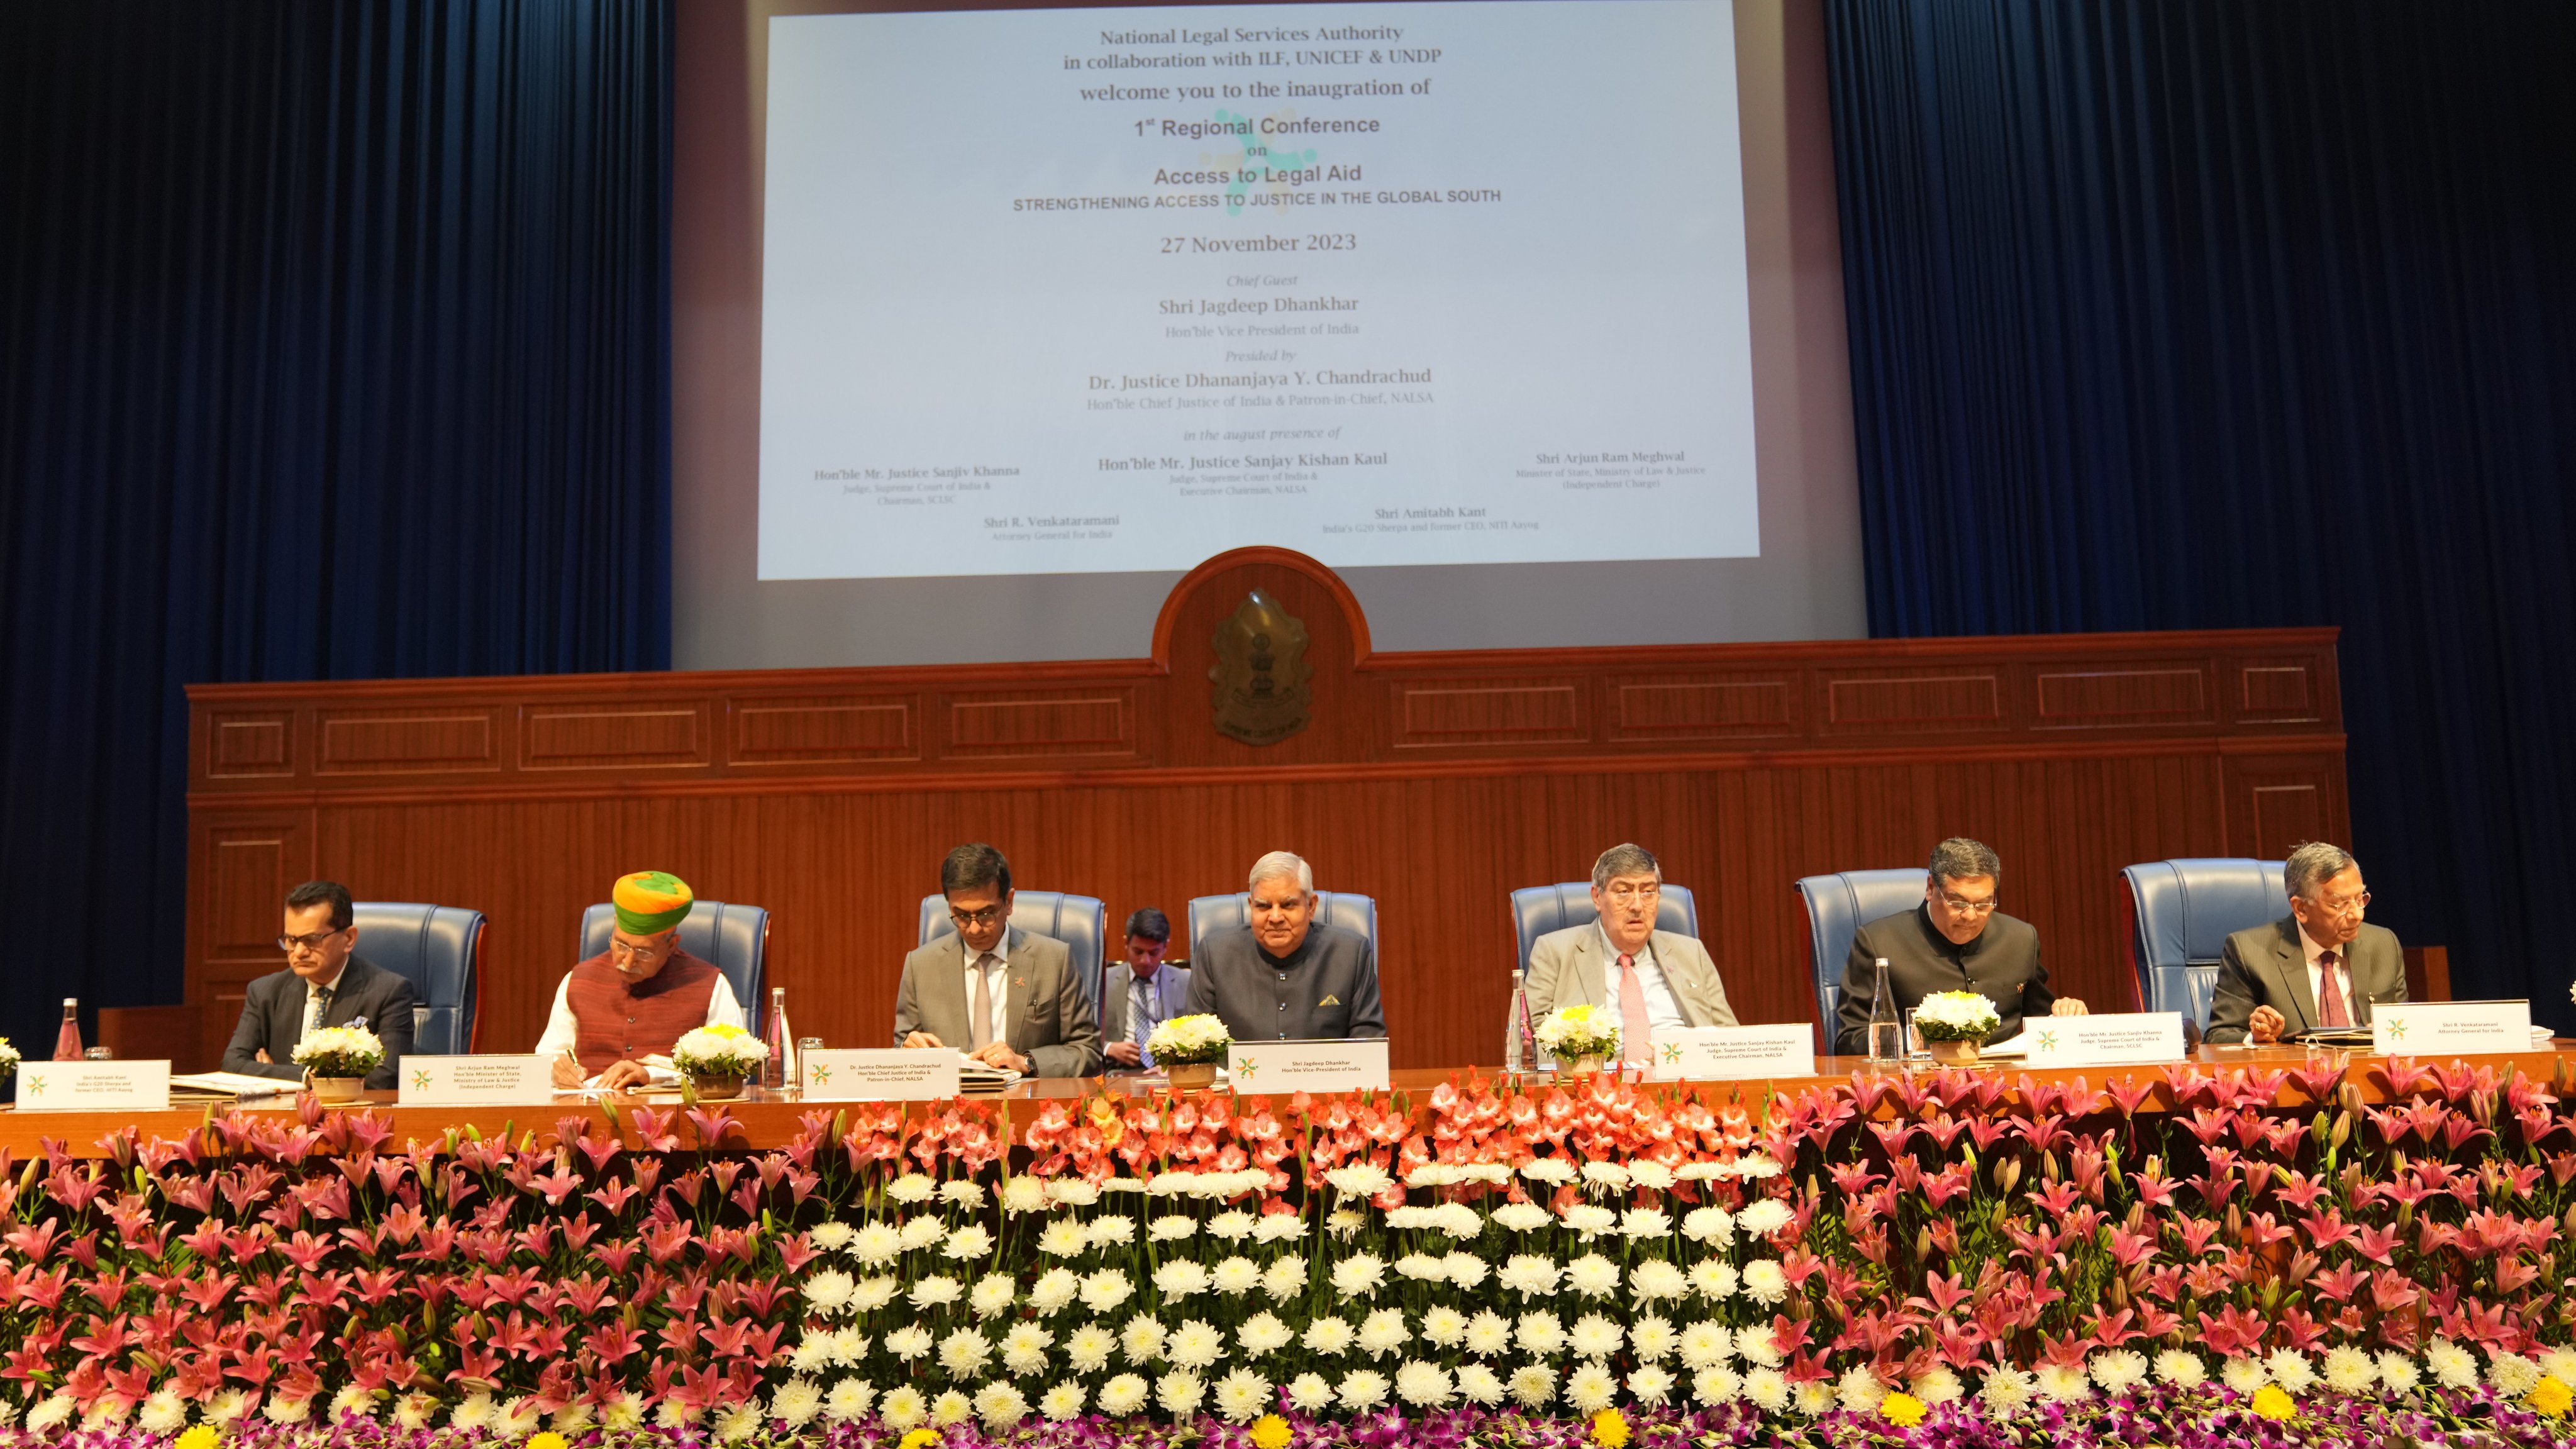 The Vice-President, Shri Jagdeep Dhankhar at the inaugural session of 1st Regional Conference on 'Access to Legal Aid: Strengthening Access to Justice in the Global South' at Supreme Court of India in New Delhi on November 27, 2023.